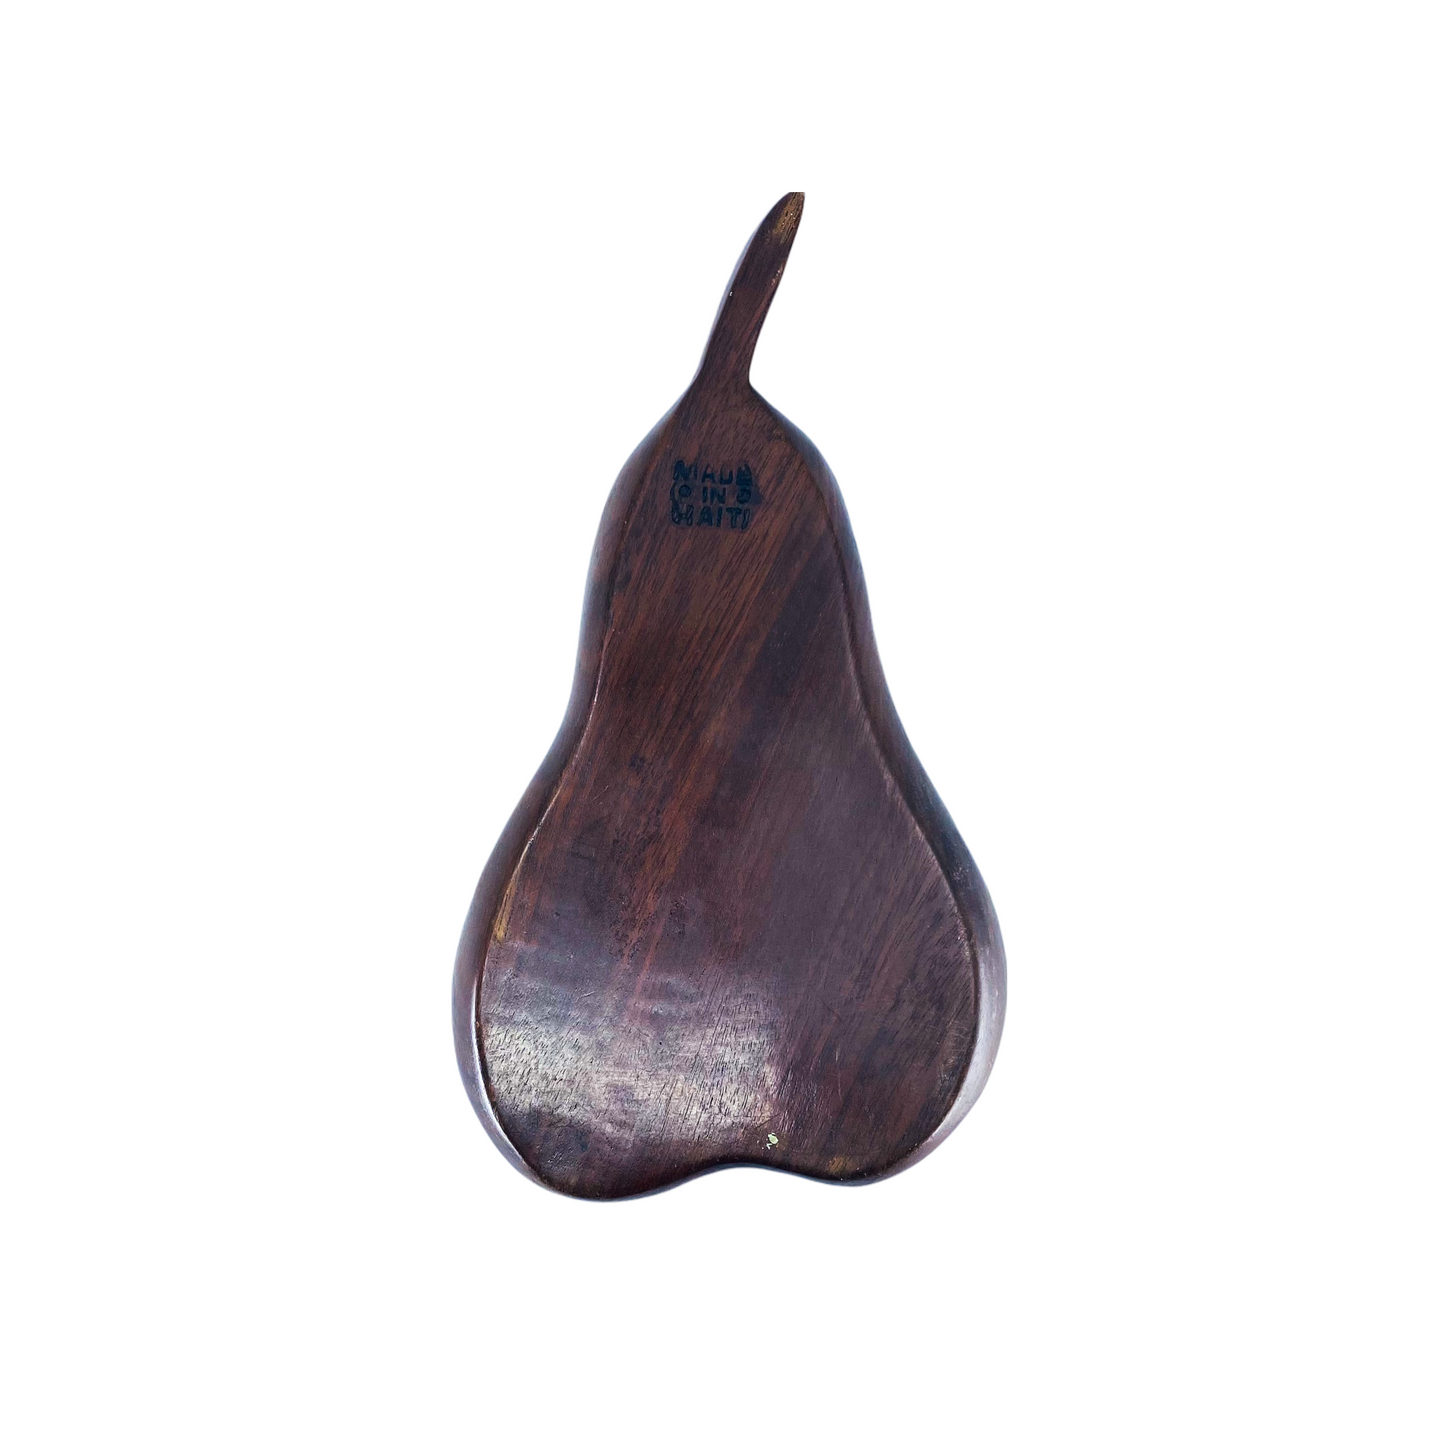 A Pair of Pear Shaped Wood Dishes